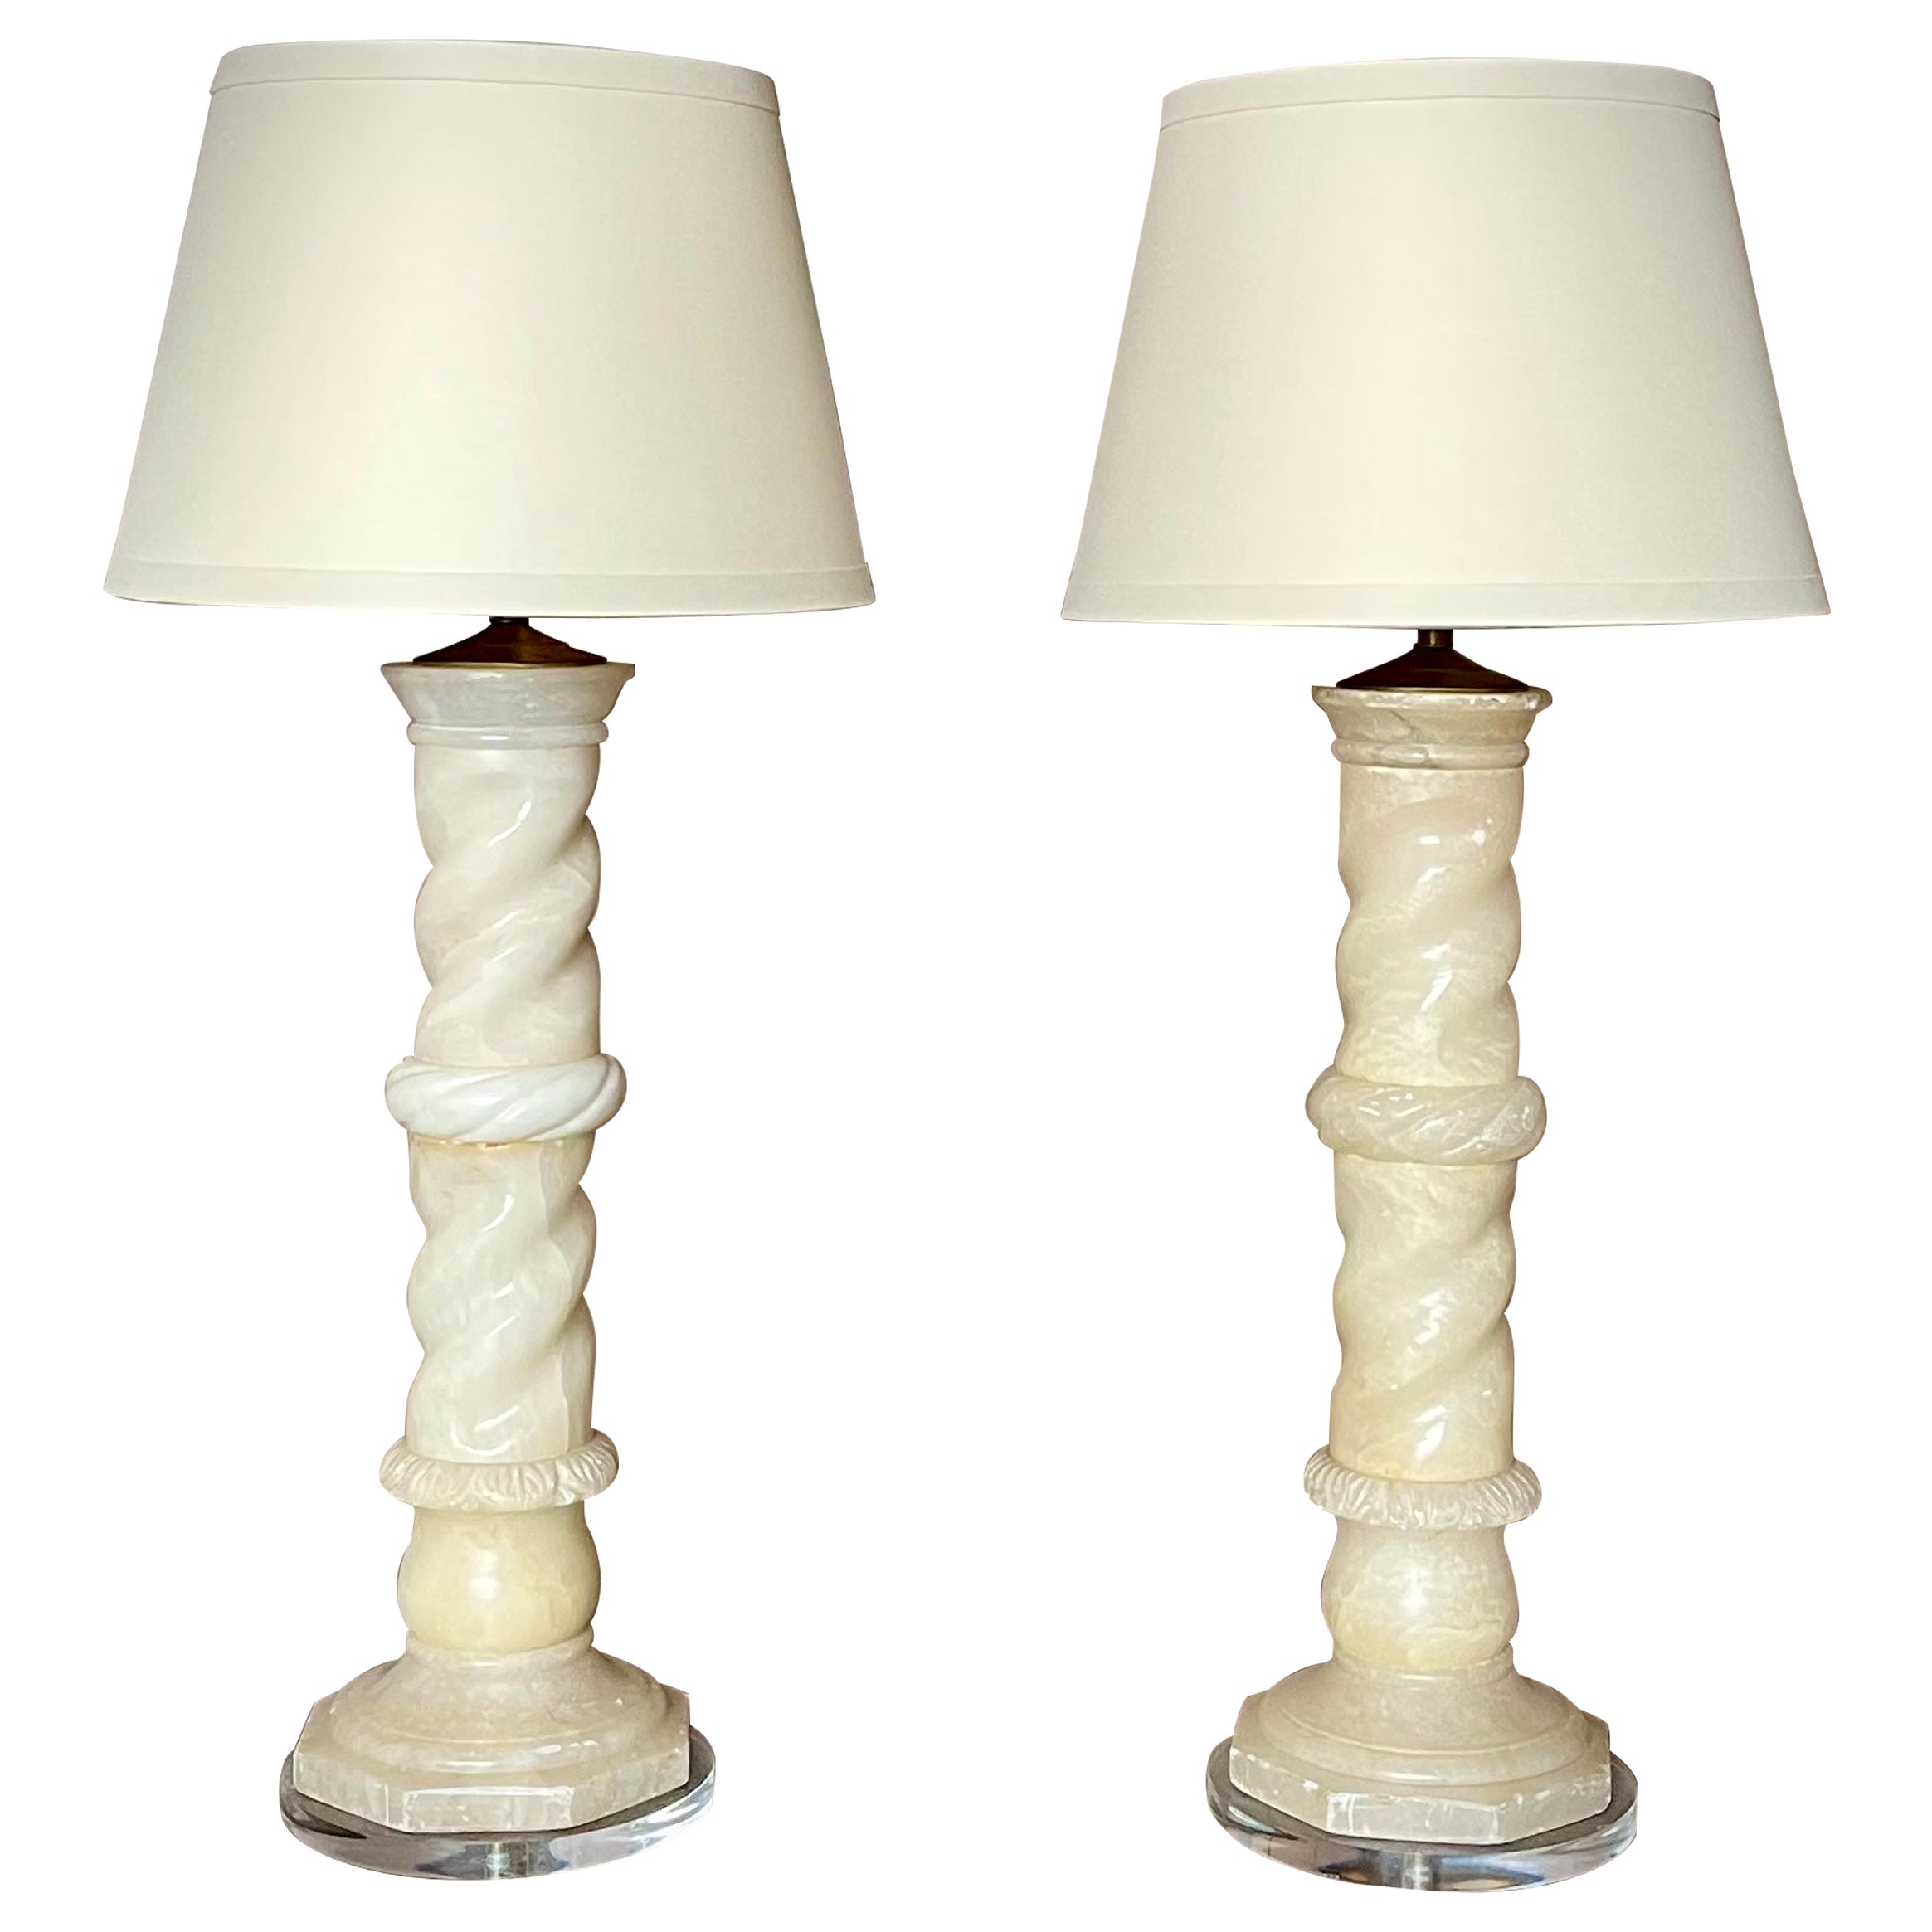 Pair Antique Italian Architectural Alabaster Lamps, Lucite Bases, Spiral Carved For Sale